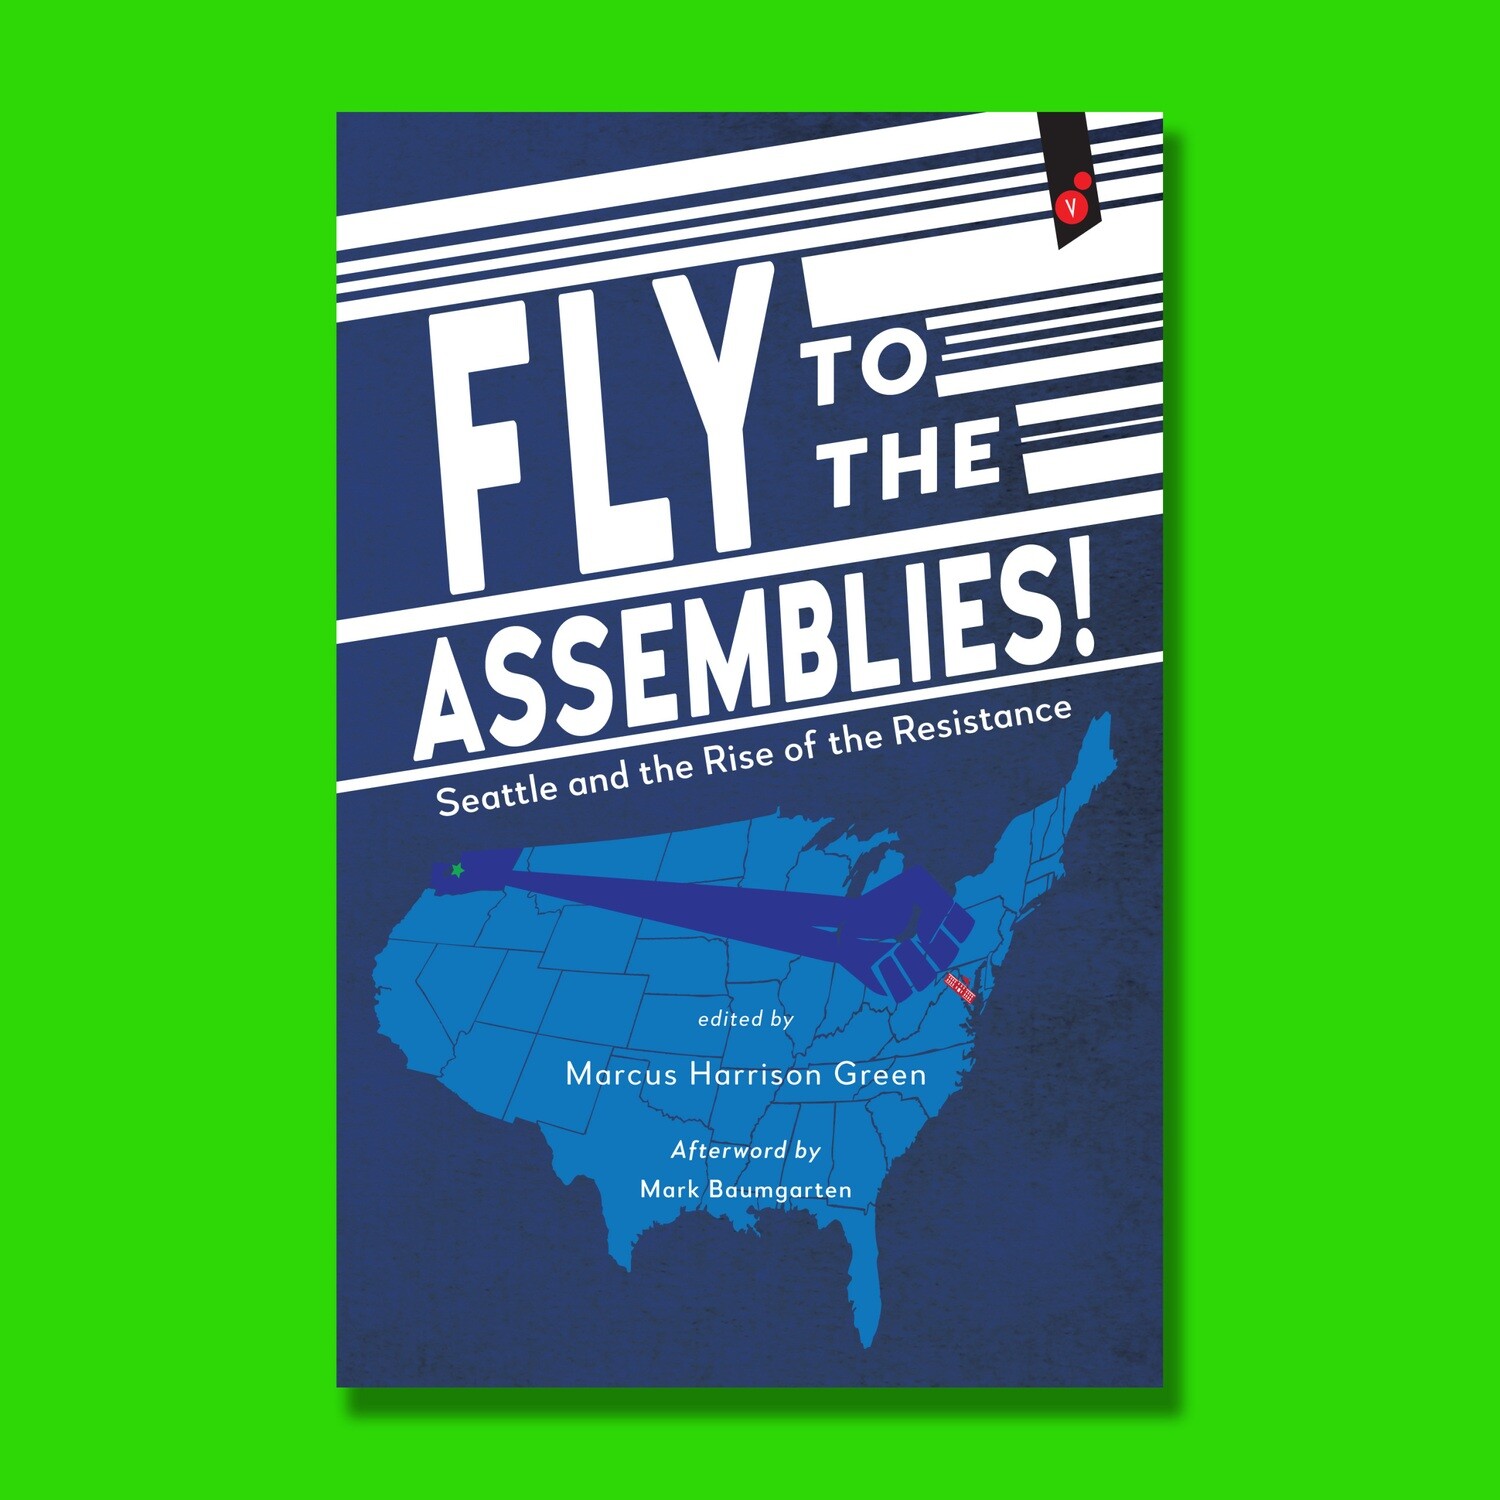 Fly To The Assemblies: Seattle And The Rise Of The Resistance - Book Edited by Marcus Harrison Green